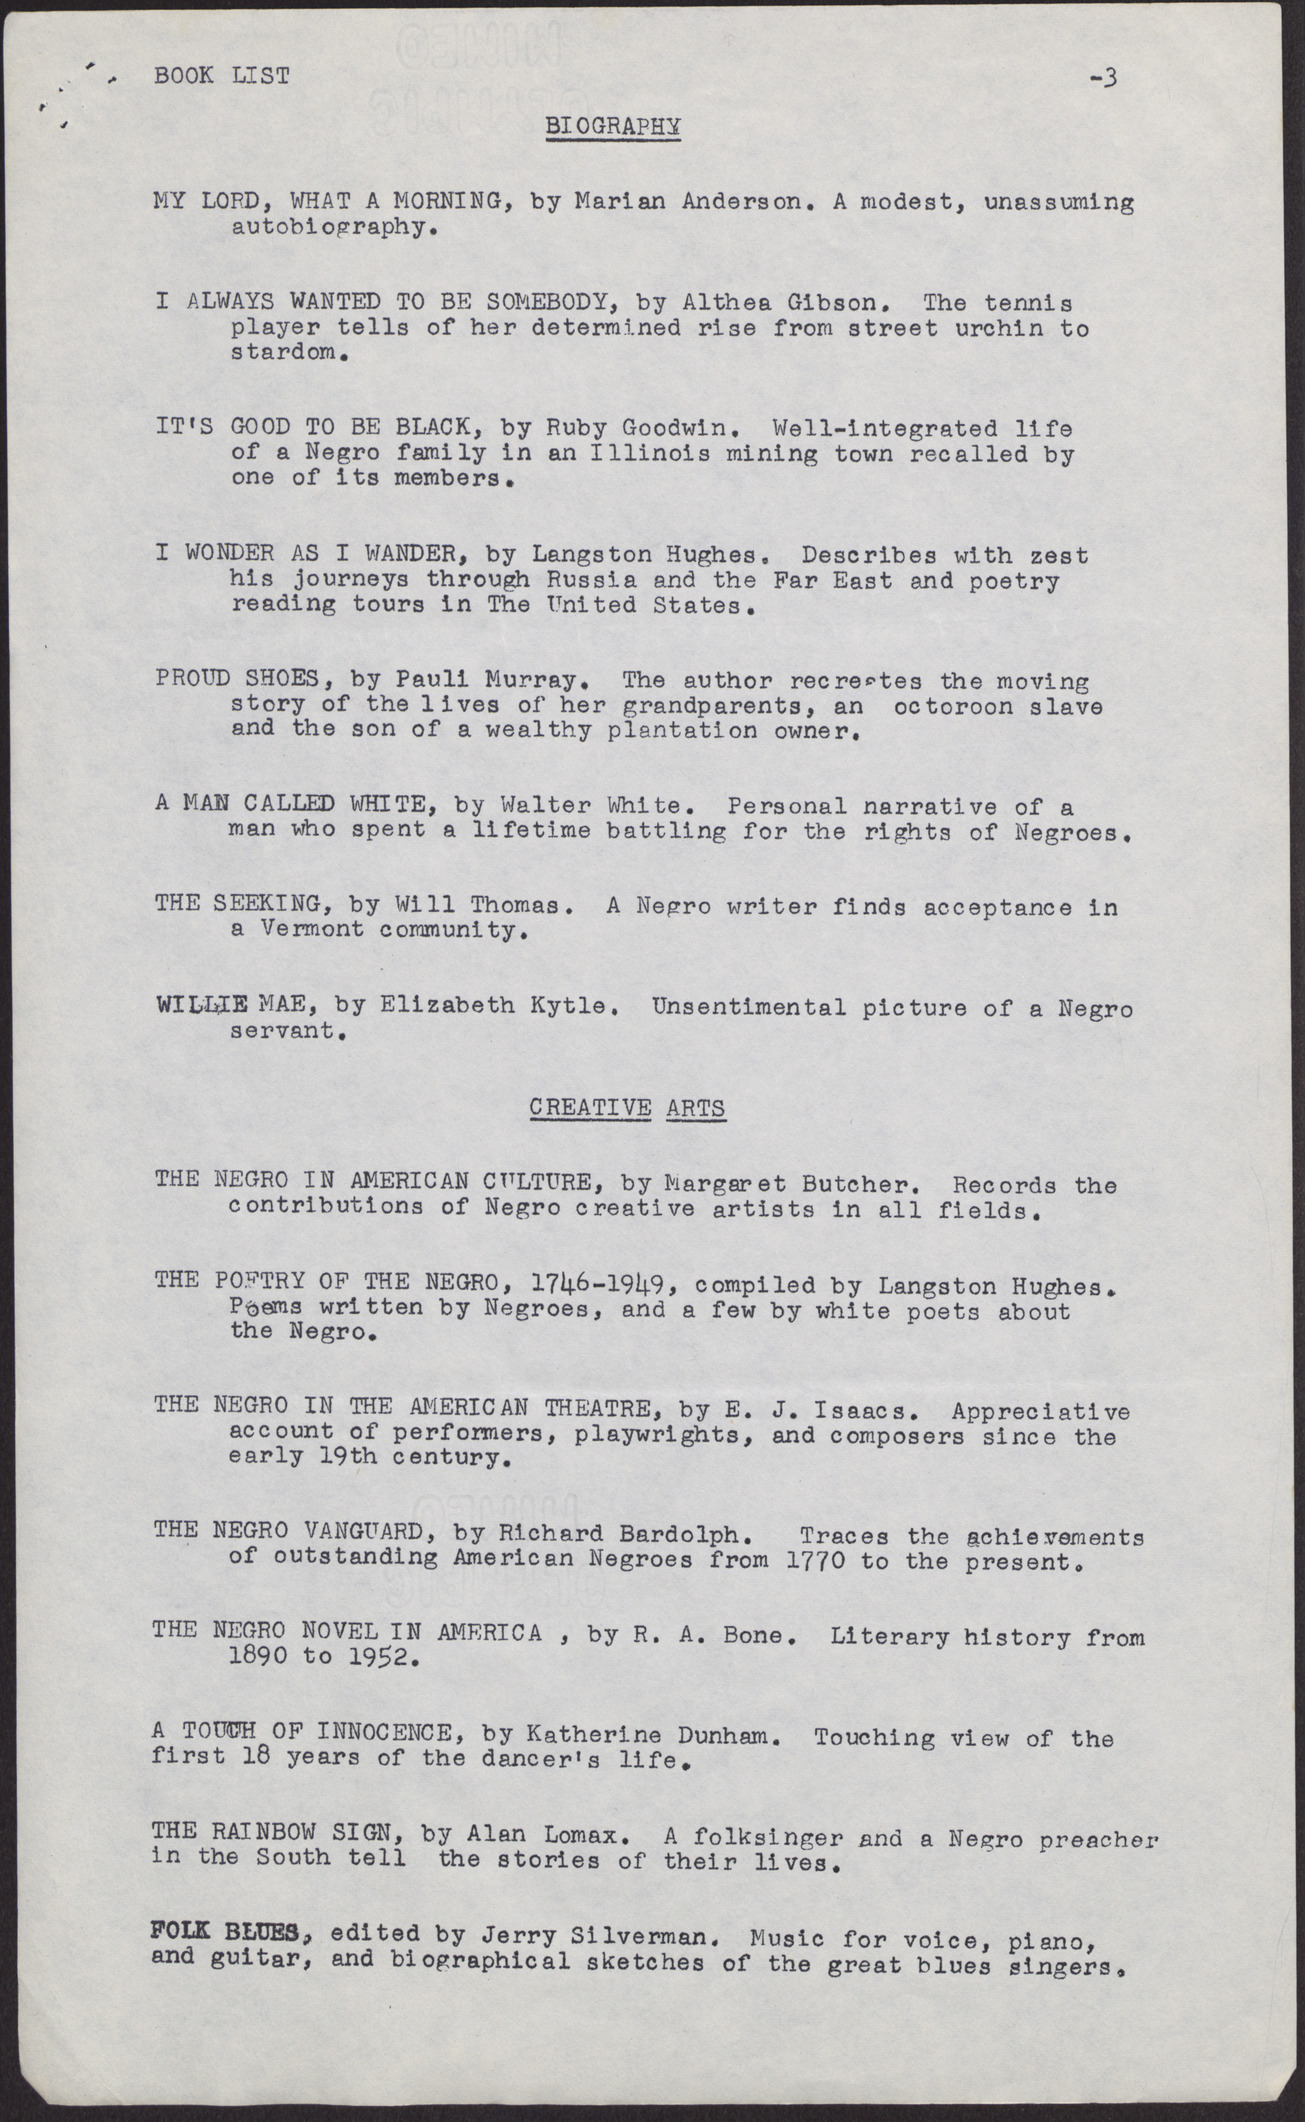 Suggested book list and phonograph records for the NAACP Anniversary and Negro History Celebrations (4 pages), no date, page 3